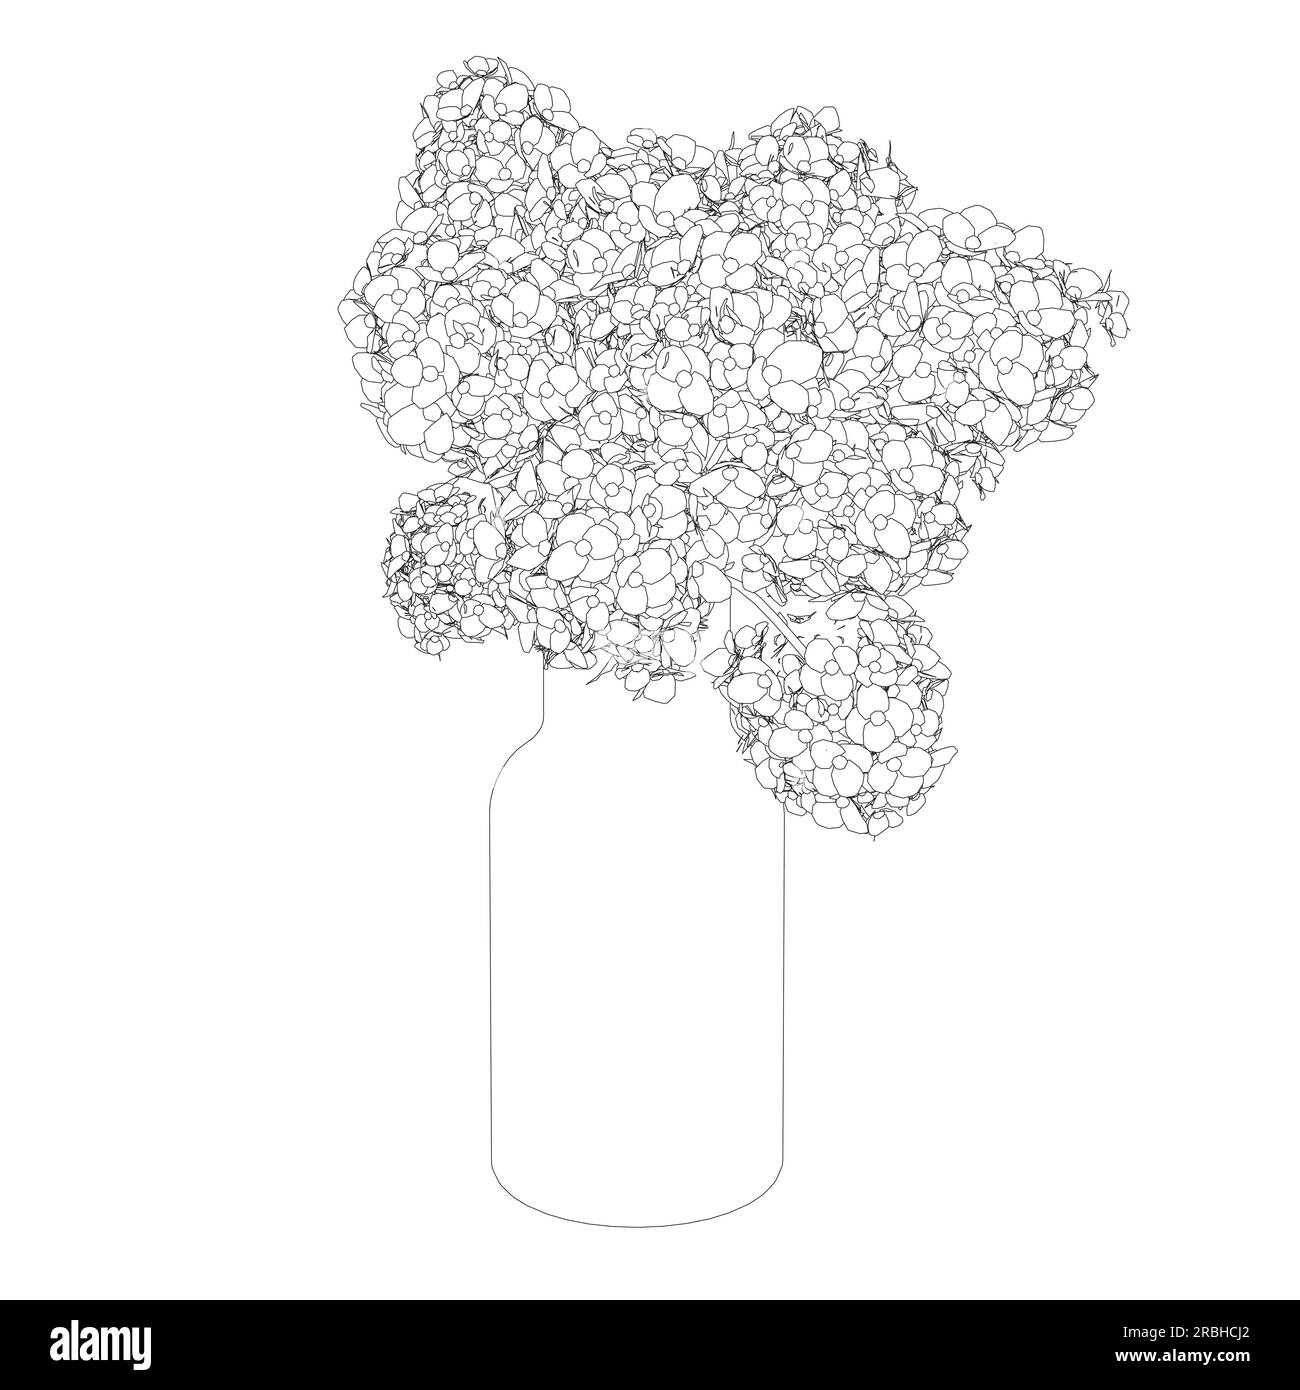 Outlines of vases with flowers. Contour of line flower bouquets in vase, vector illustration. Stock Vector